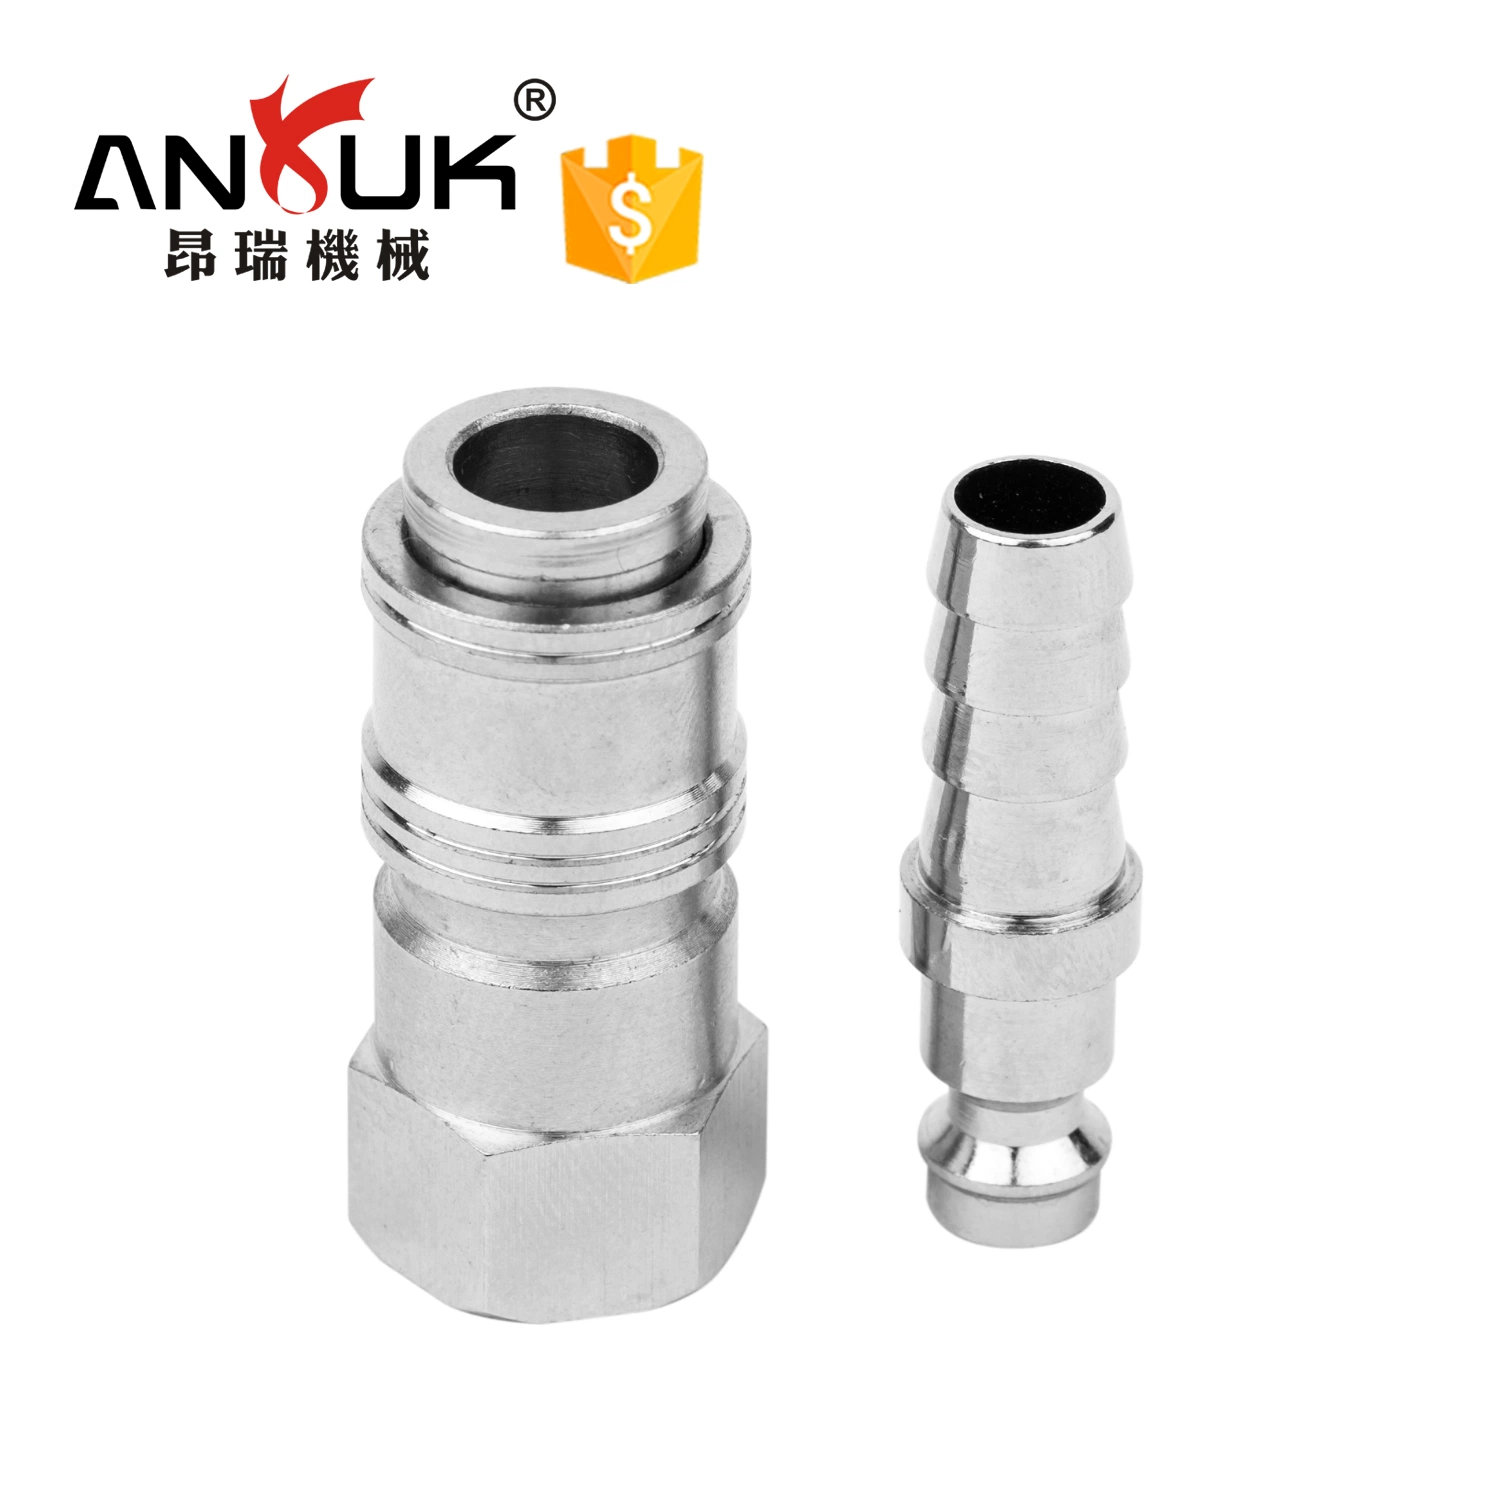 Fast One -Touch Hose Fittings Iron Quick Pneumatic Disconnect Coupling for 4mm-35mm